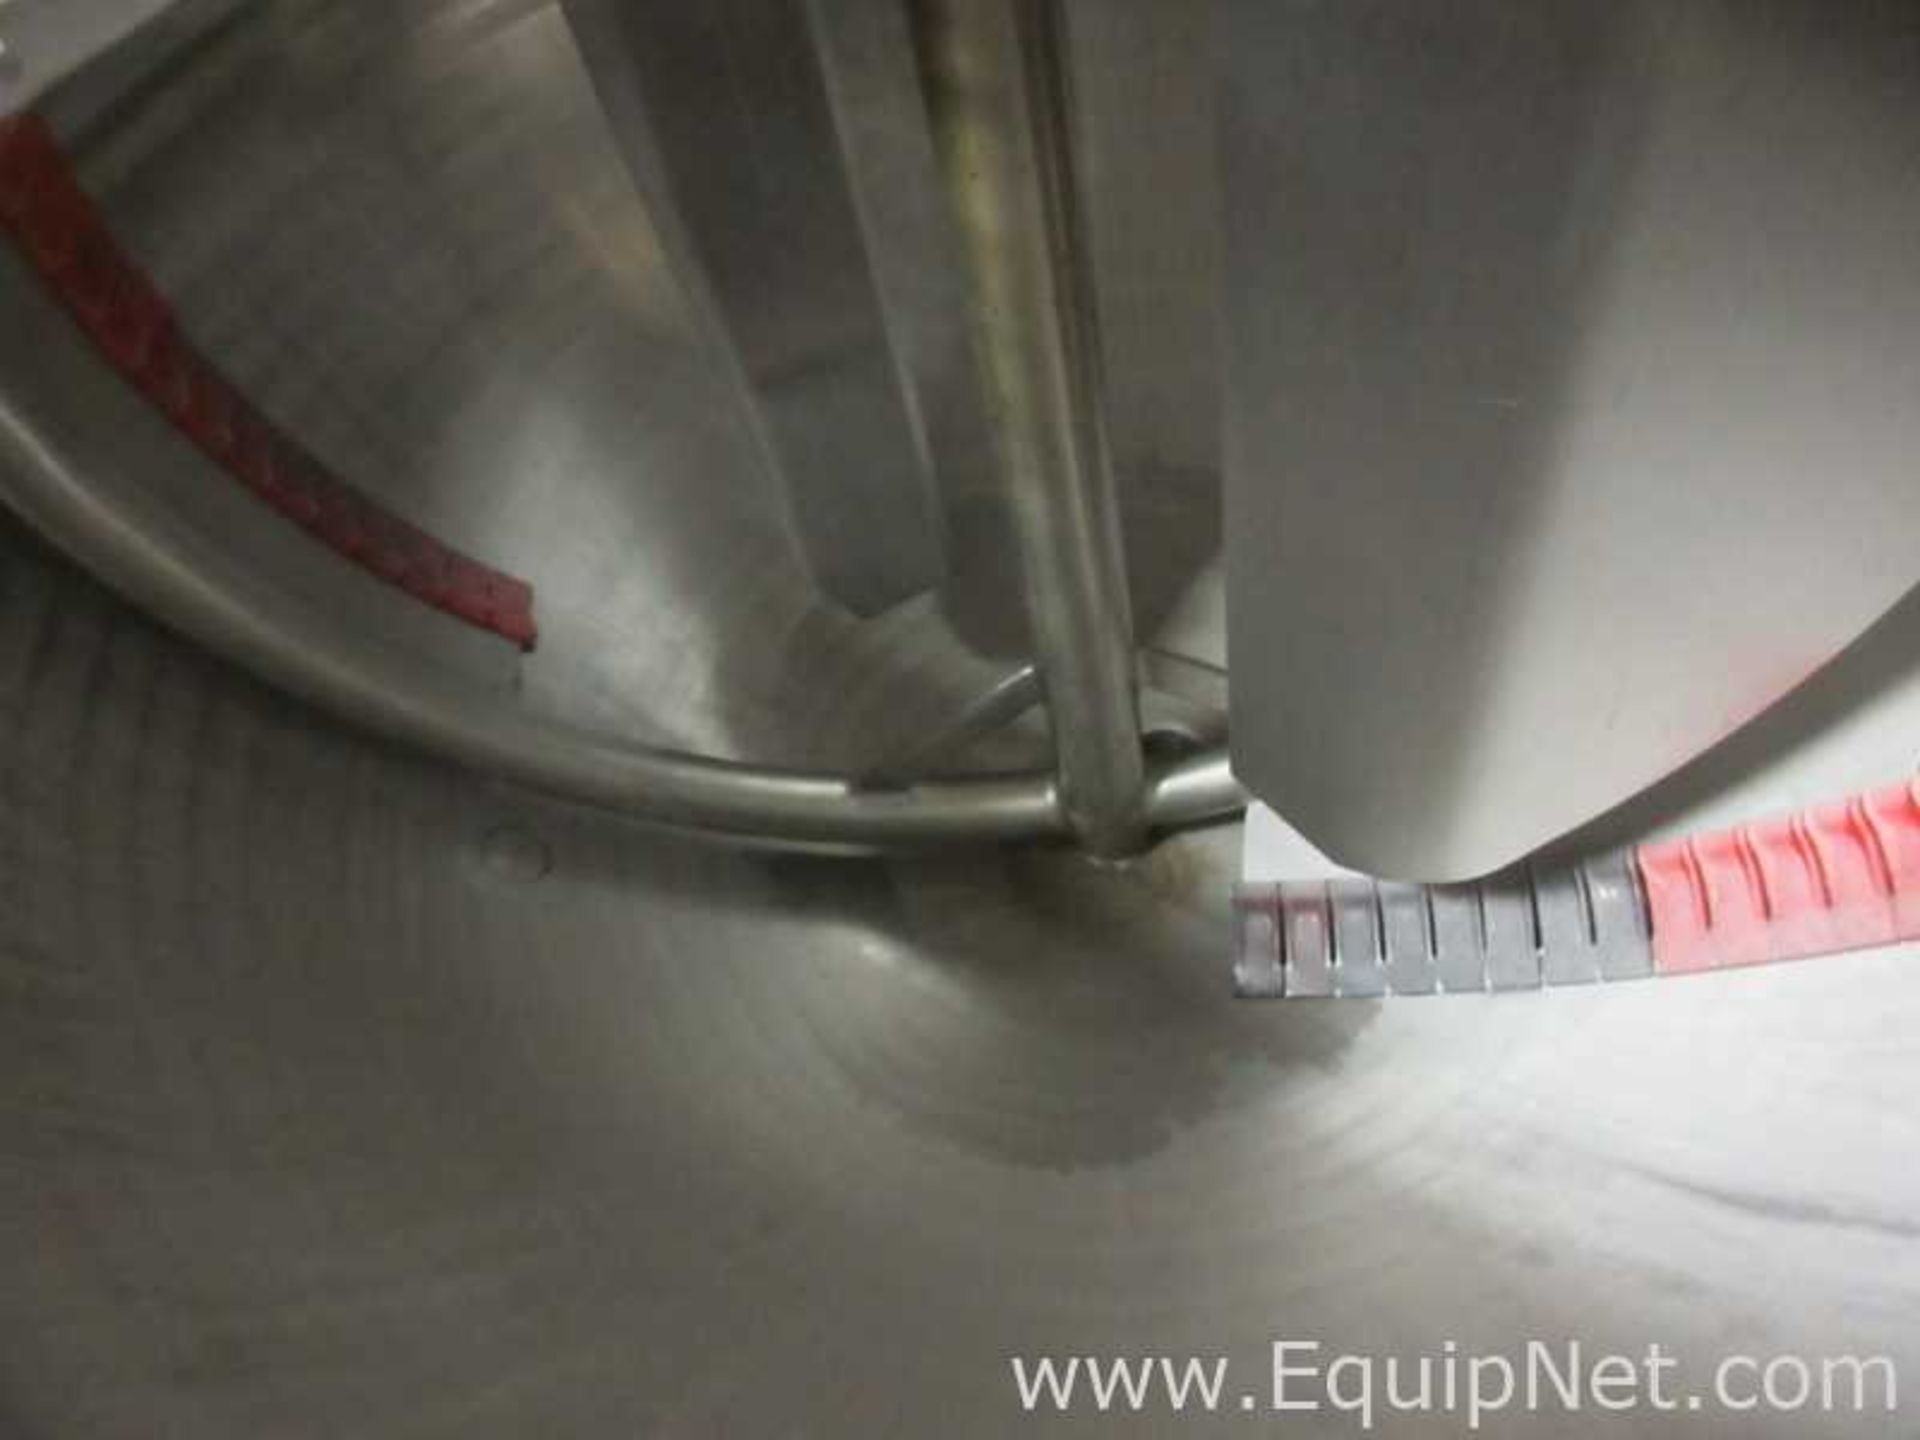 250 Gallon Lee Jacketed Sanitary Stainless Steel Kettle With Sweep Agitator - Image 3 of 6